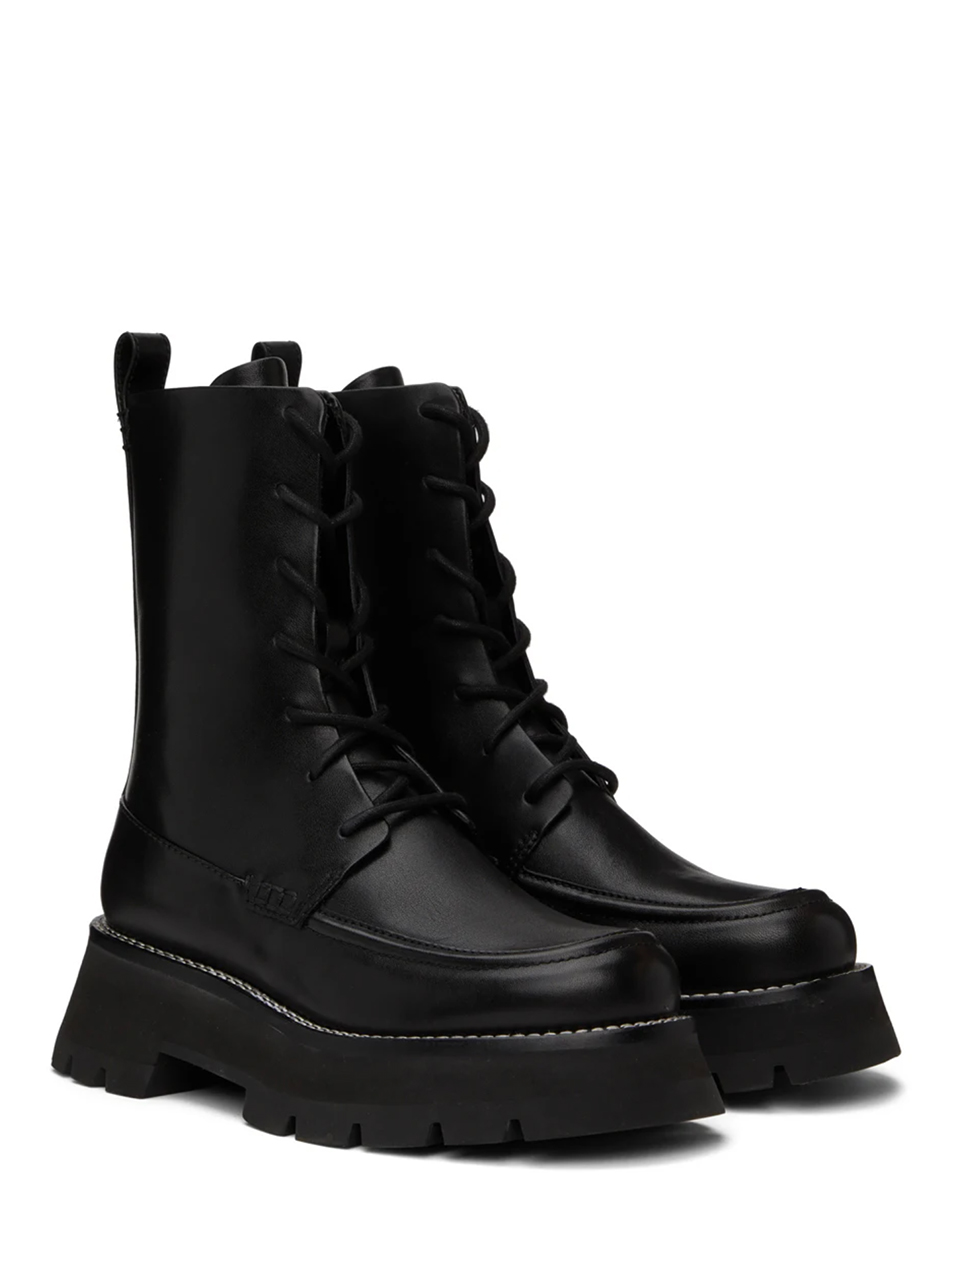 3.1 PHILLIP LIM Kate Lace Up Combat Boot in Black Both Boots Side View 